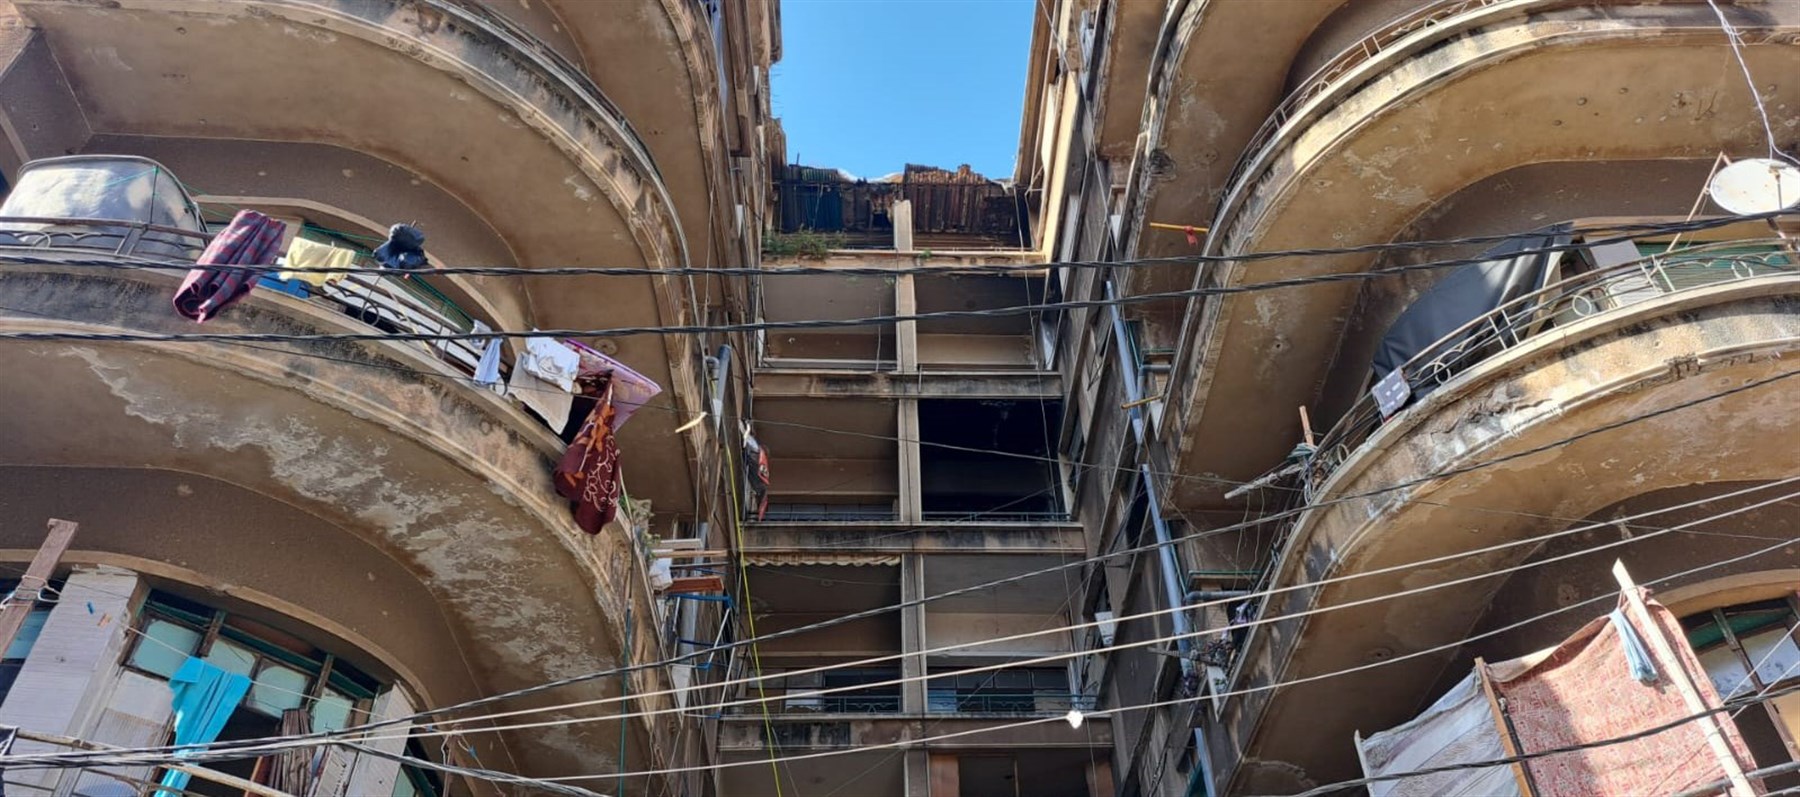 AUB launches a new platform, Precarious Lives - Housing Uncertainties in Beirut